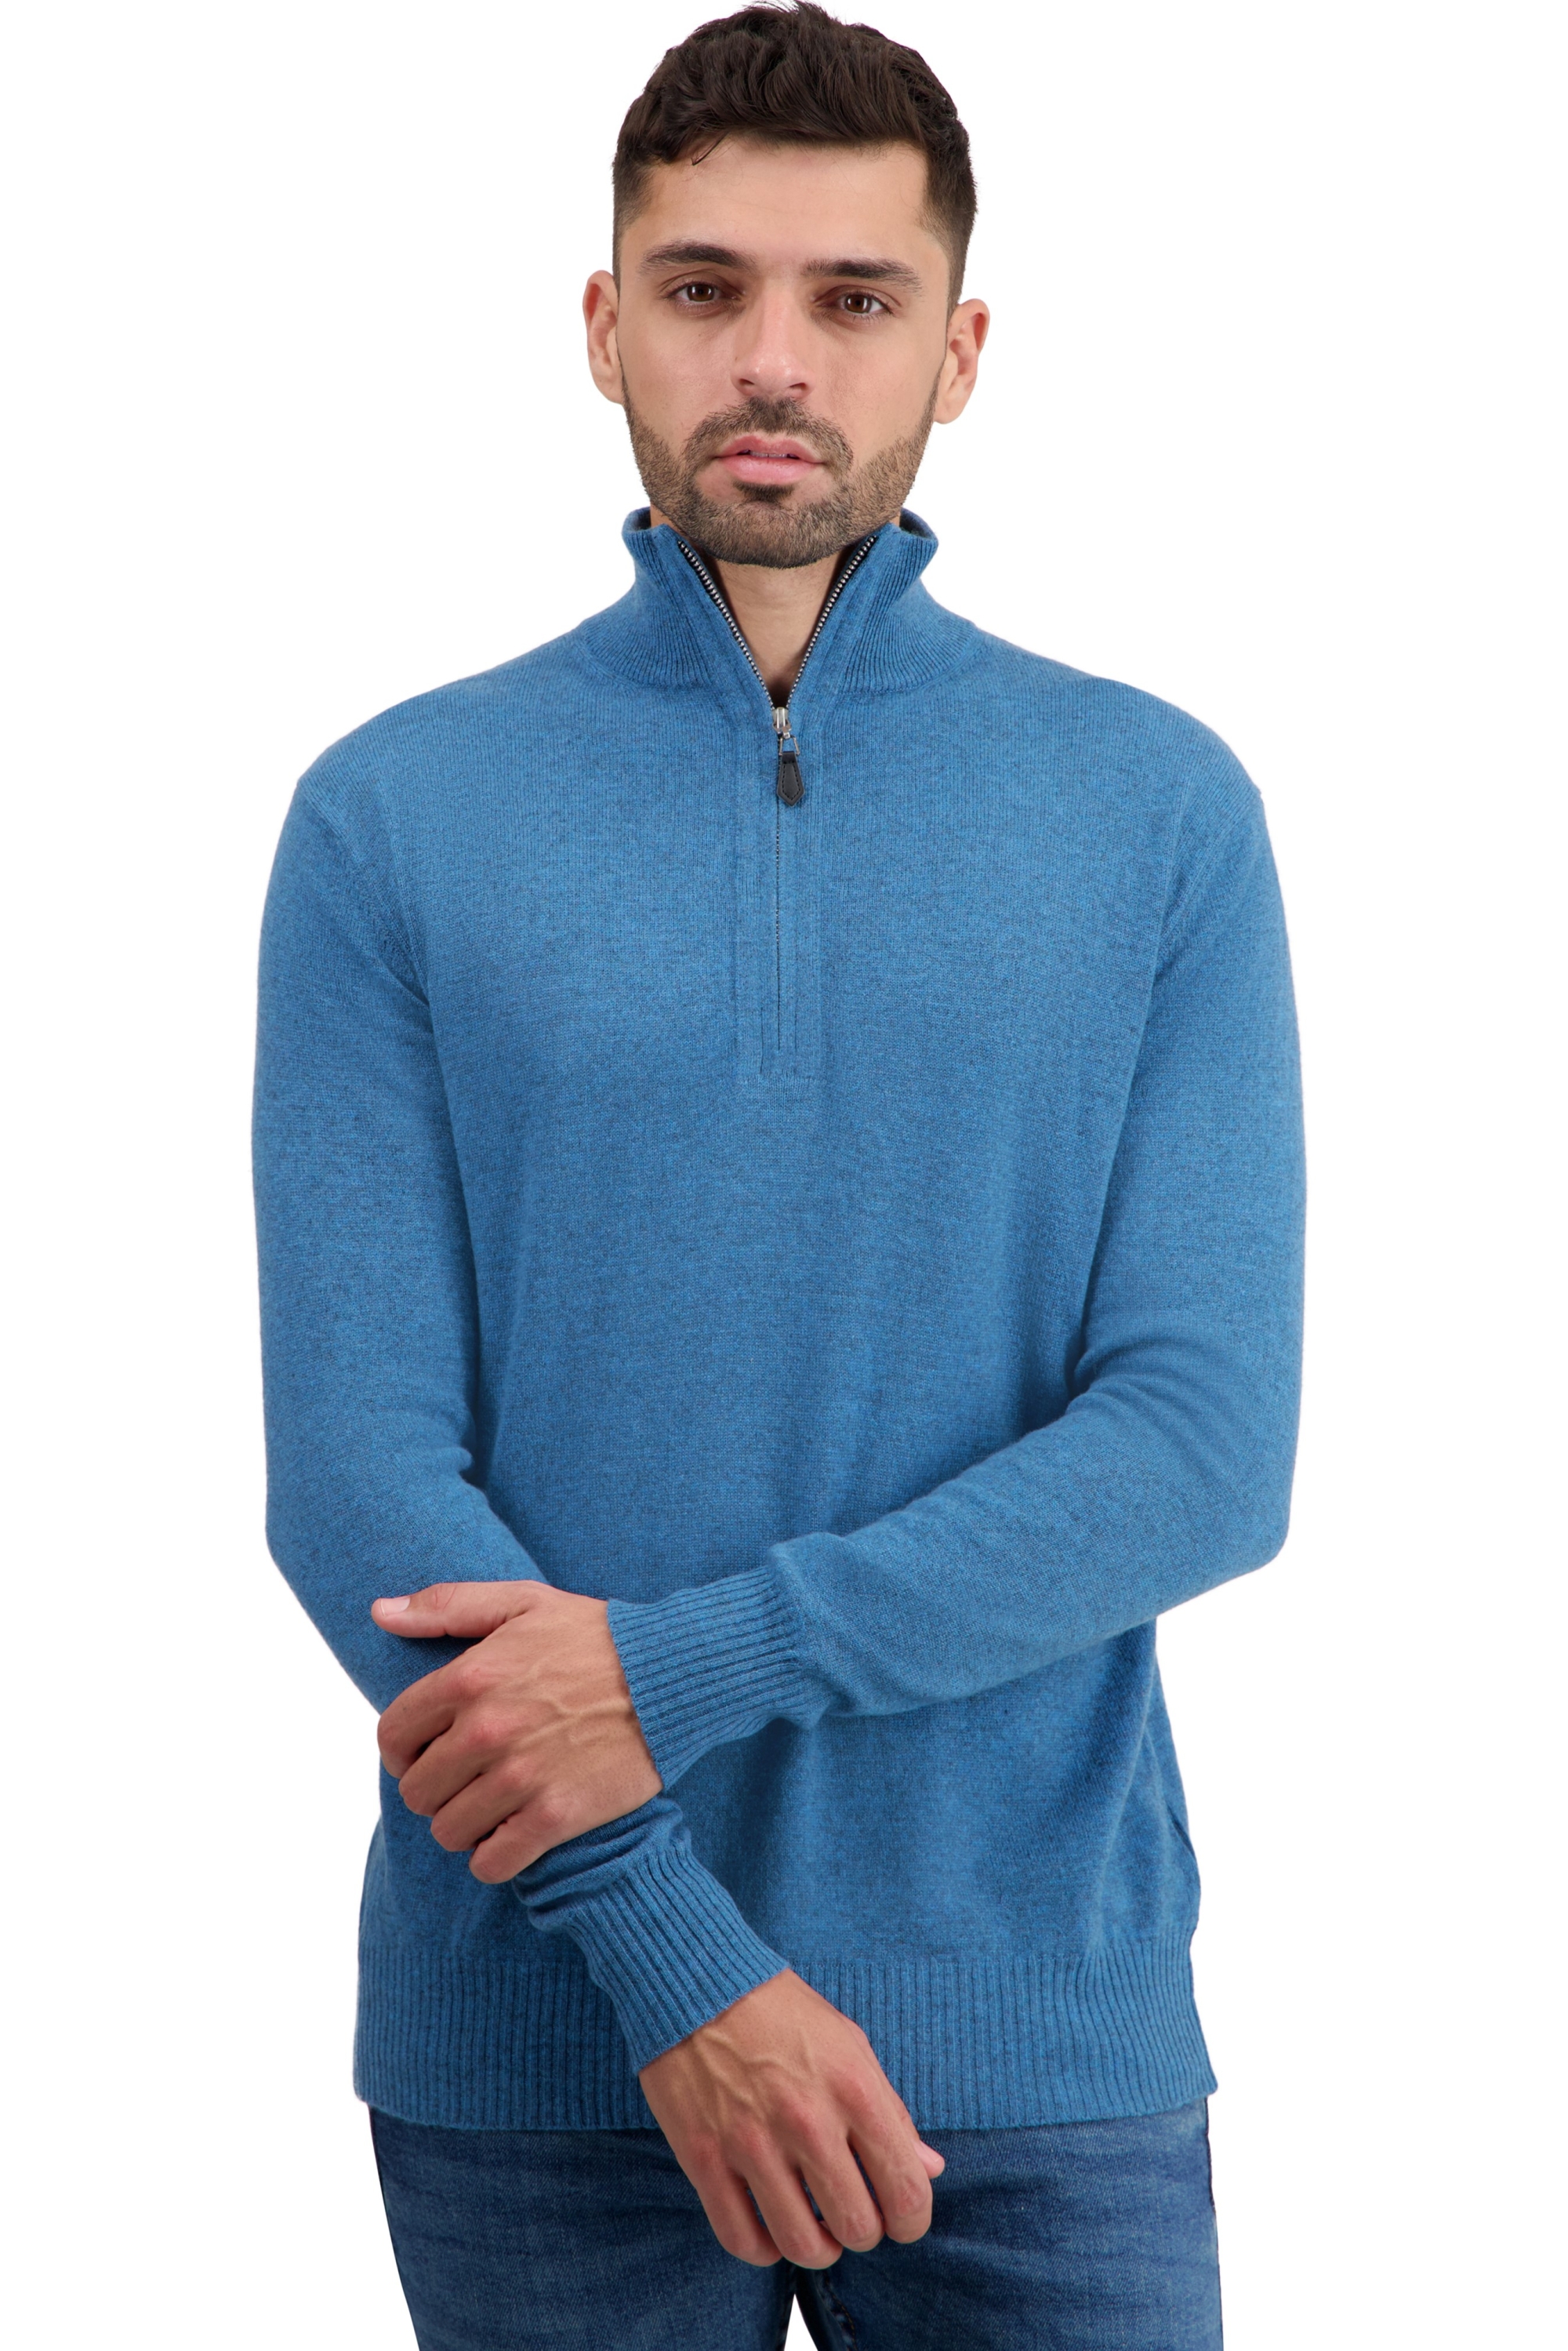 Cashmere men polo style sweaters toulon first manor blue 3xl